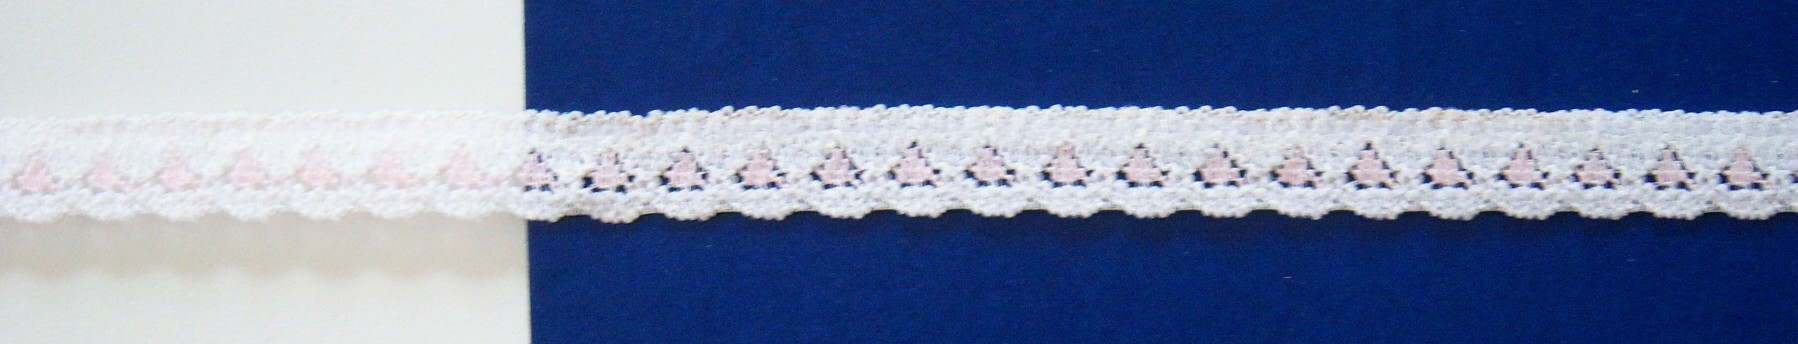 White/Pink 7/16" Stretch Lace